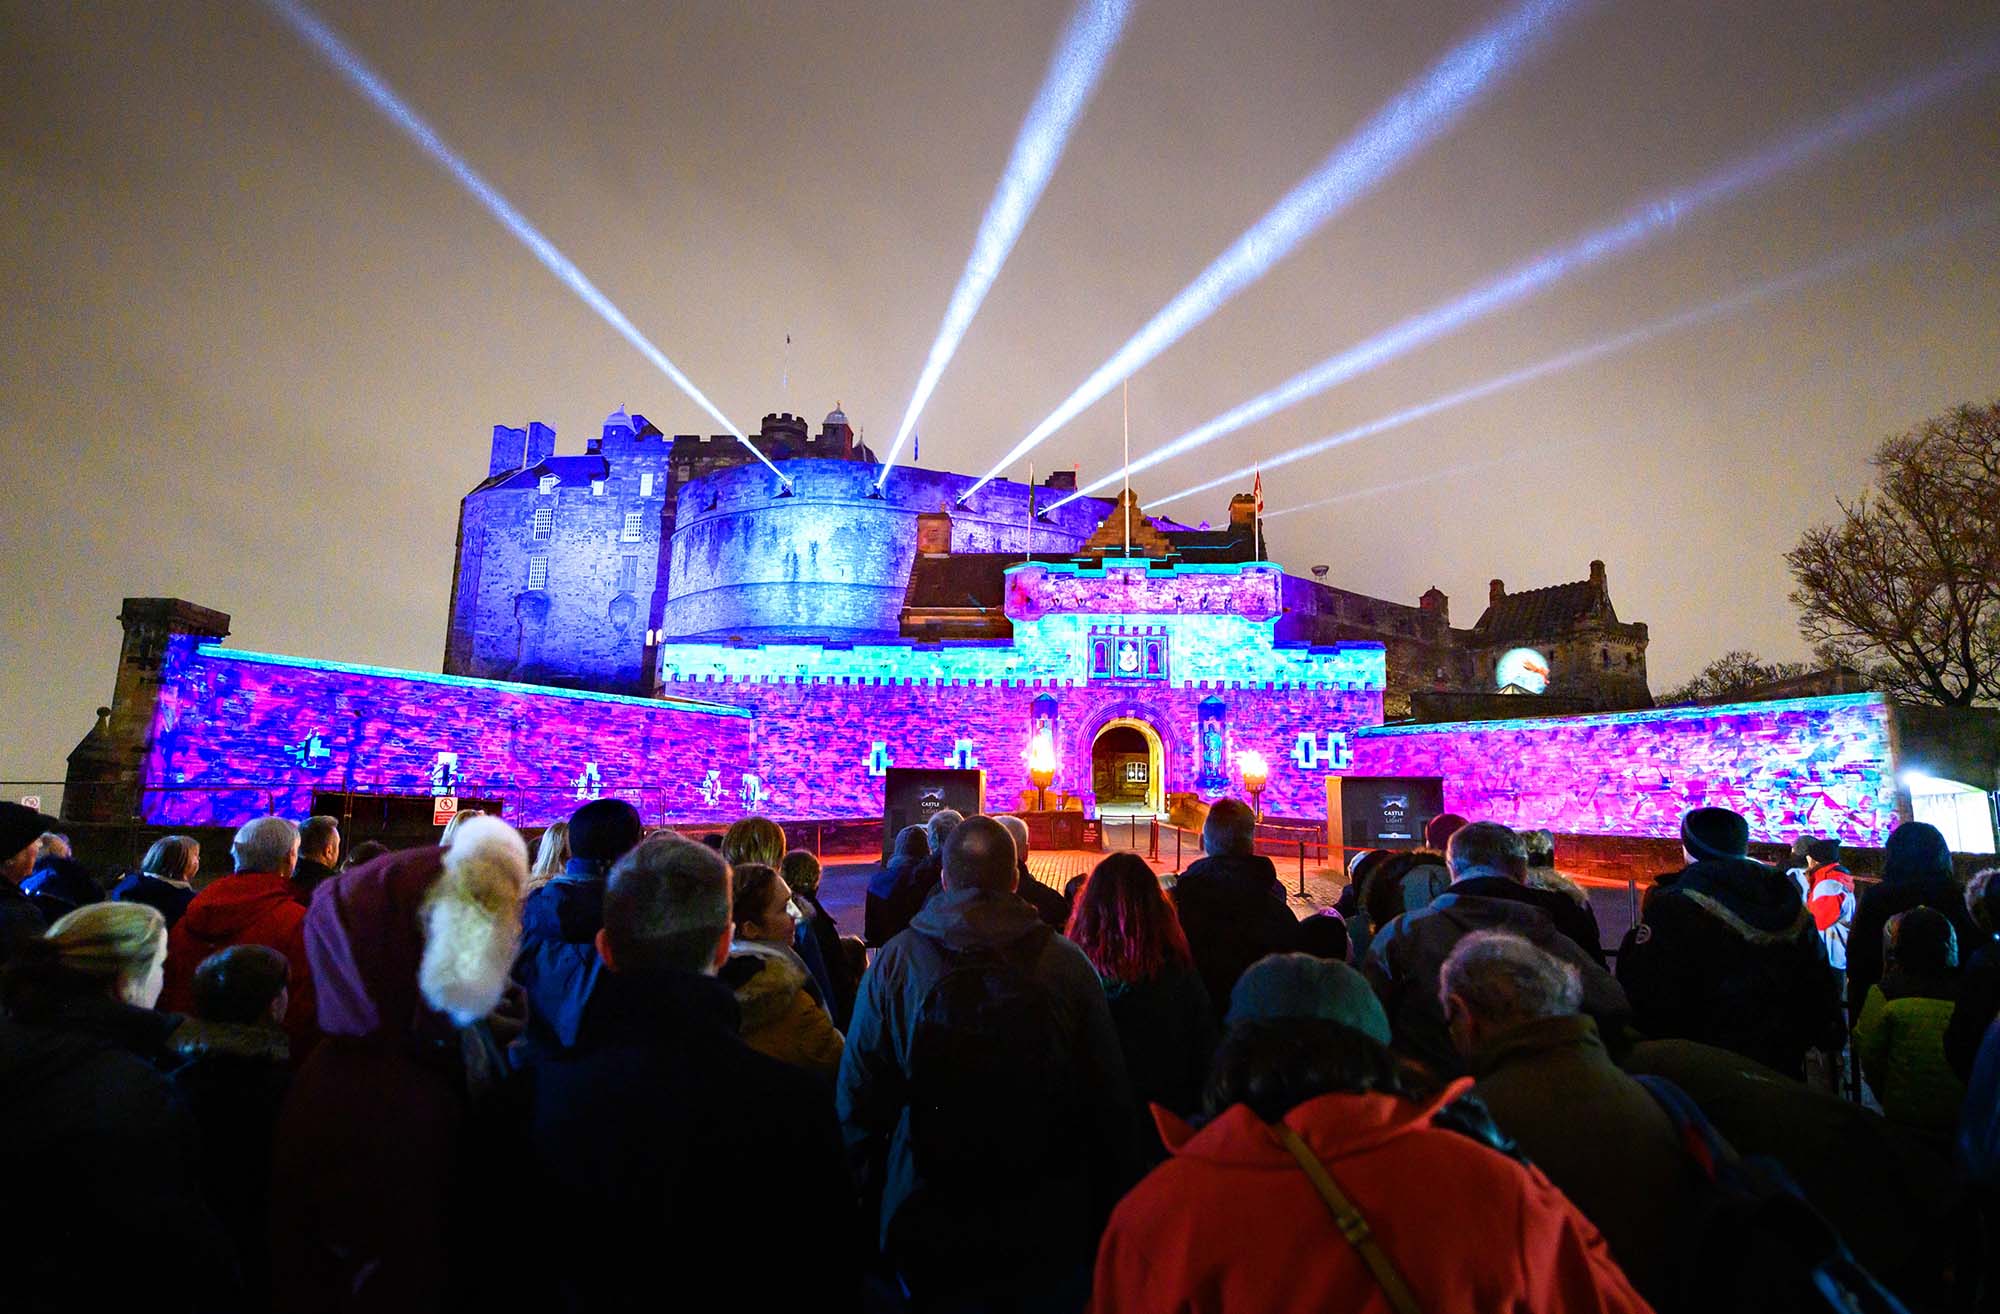 https://doubletakeprojections.com/wp-content/uploads/2020/03/Edinburgh_castle_COL_projection_mapping_event_light_walk_immersive_spectacle_scotland_uk_live_experience_14.jpg